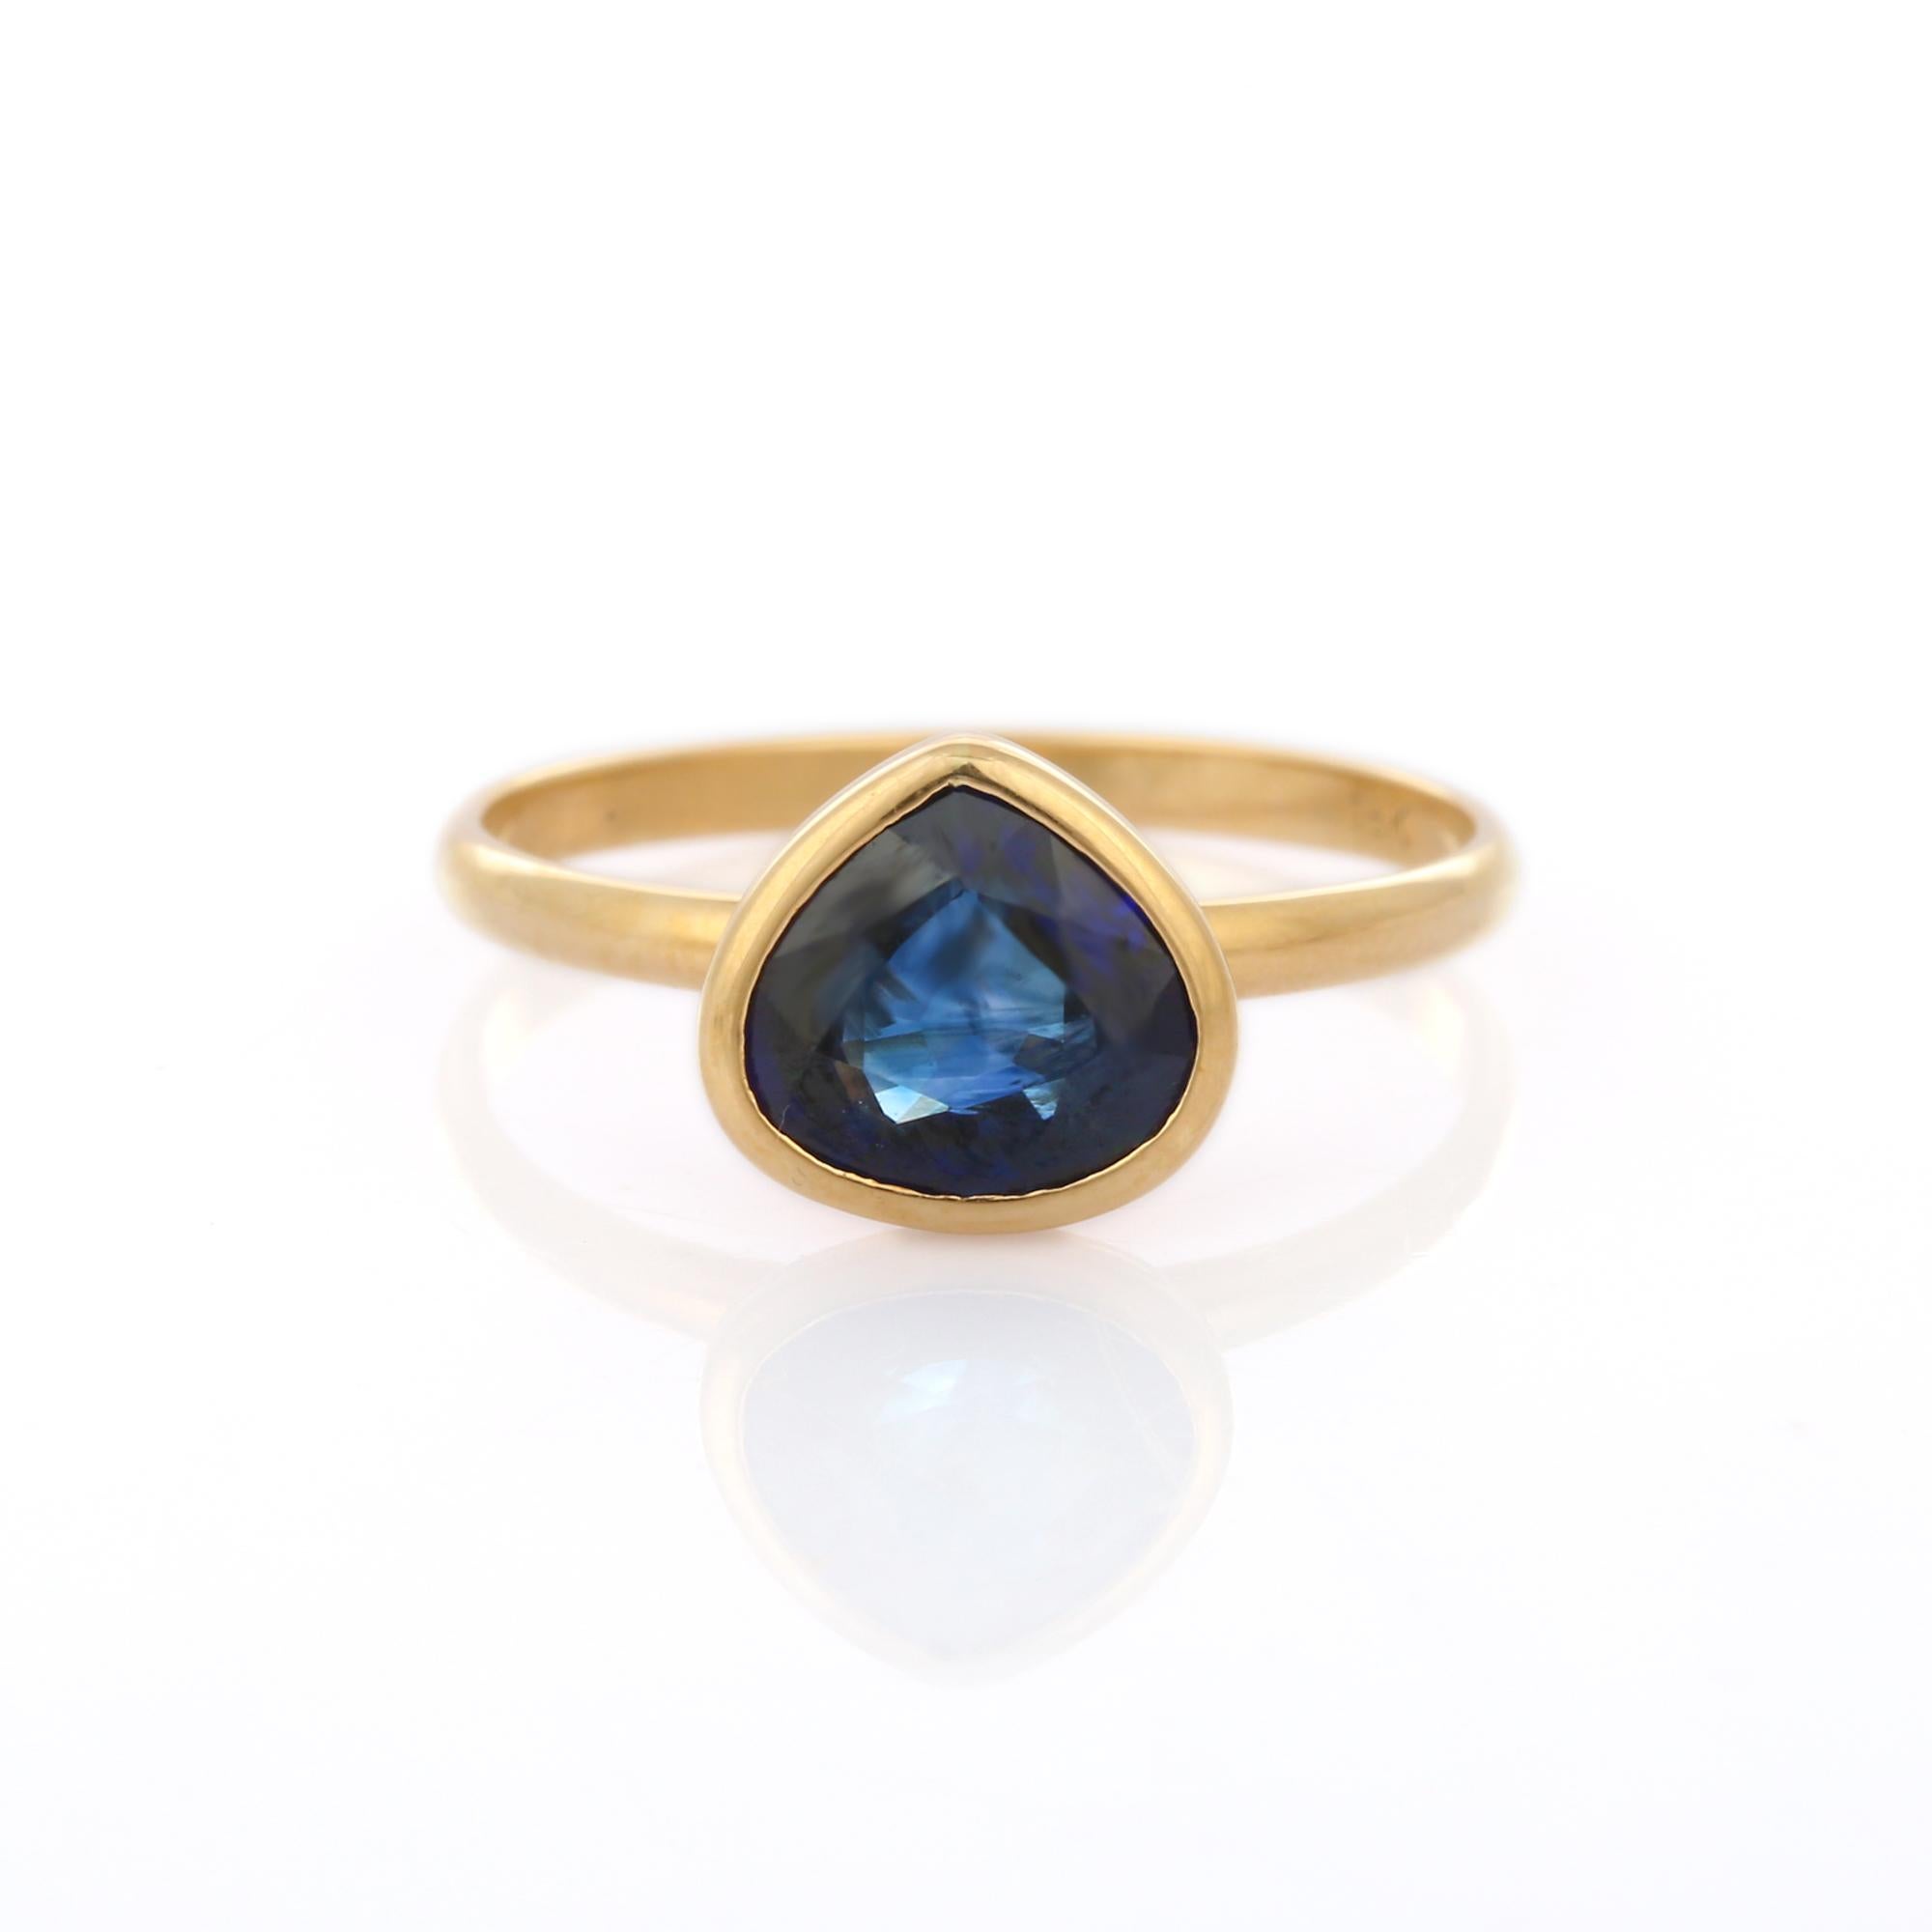 For Sale:  1.66 ct Bezel Set Pear Cut Blue Sapphire Gemstone 18K Yellow Gold Solitaire Ring 5